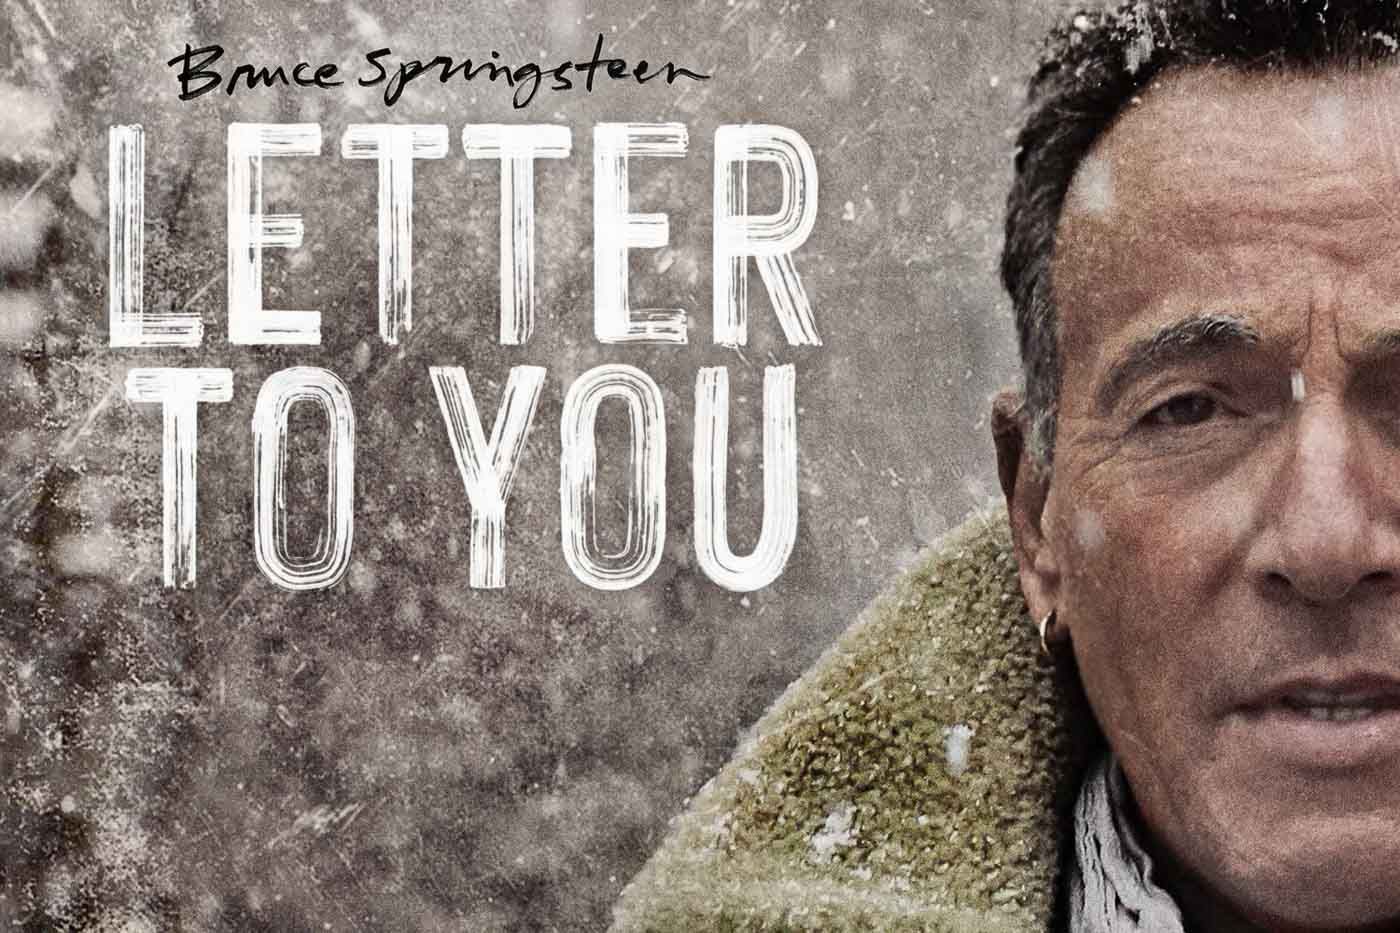 Bruce Springsteen “Letter to You” (Columbia Records, 2020)